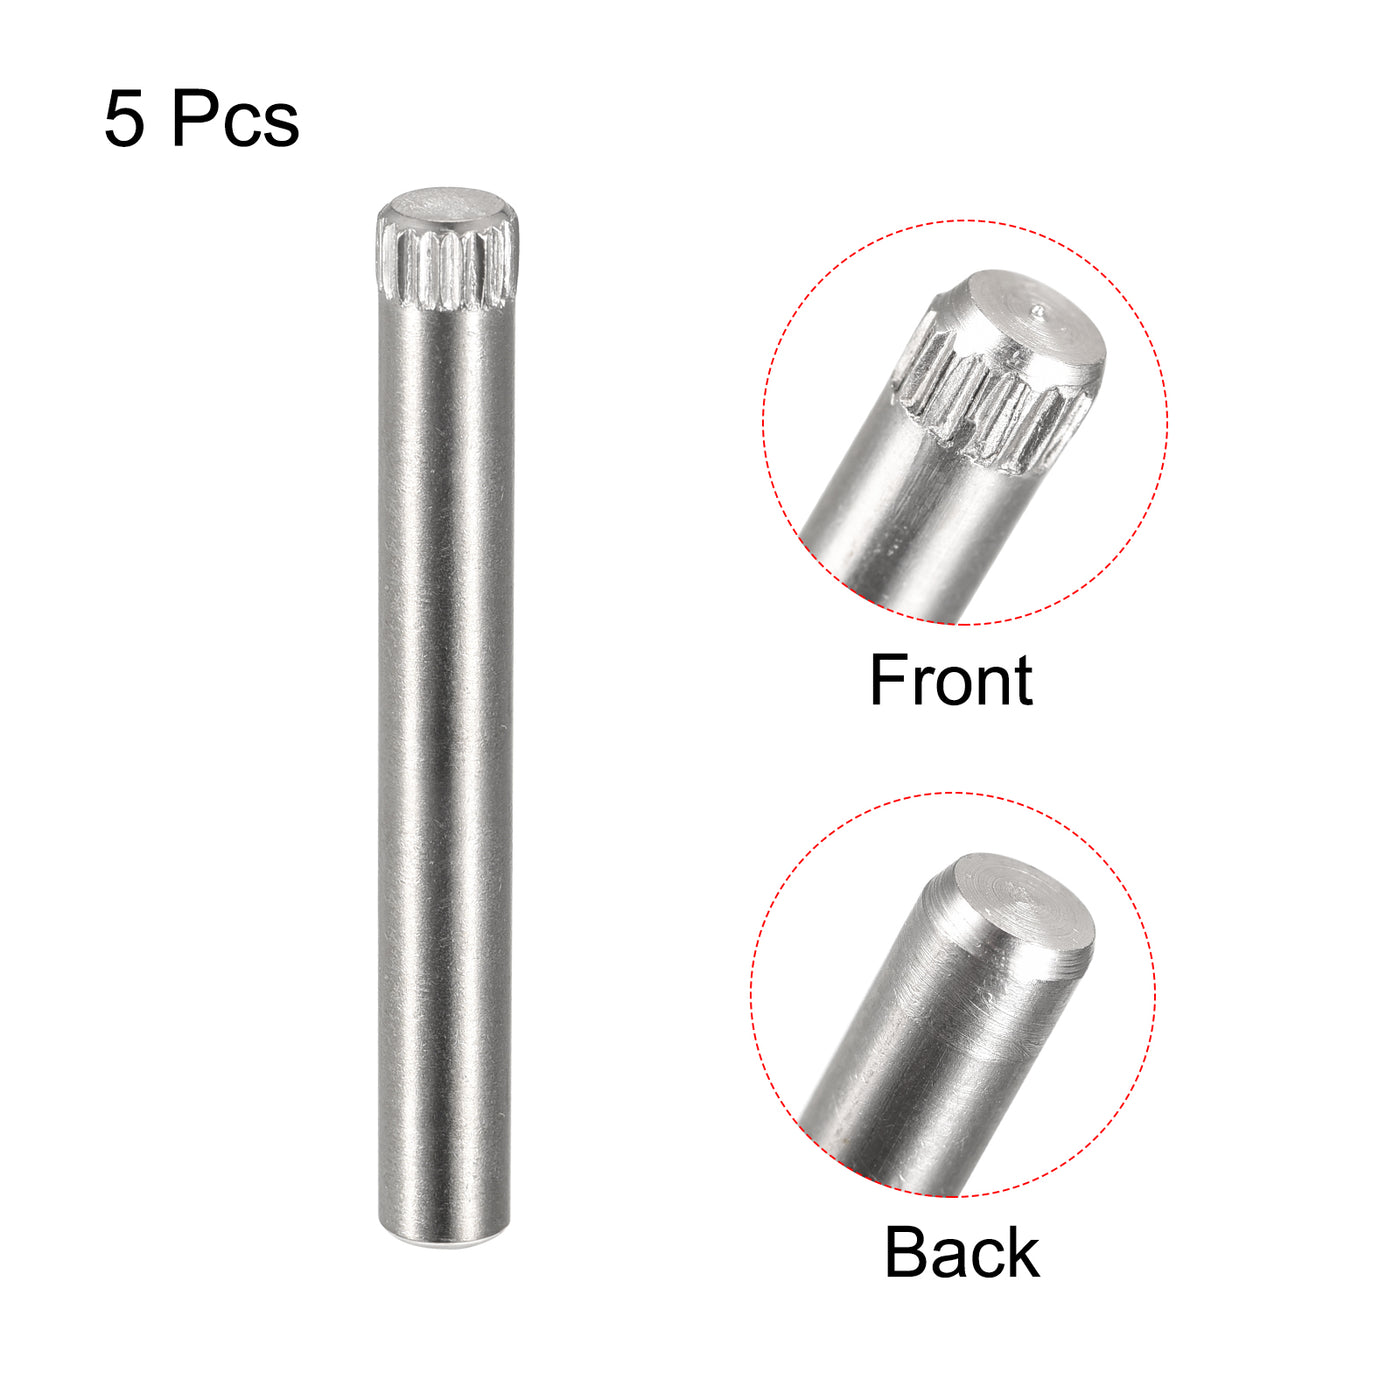 uxcell Uxcell 5x40mm 304 Stainless Steel Dowel Pins, 5Pcs Knurled Head Flat End Dowel Pin